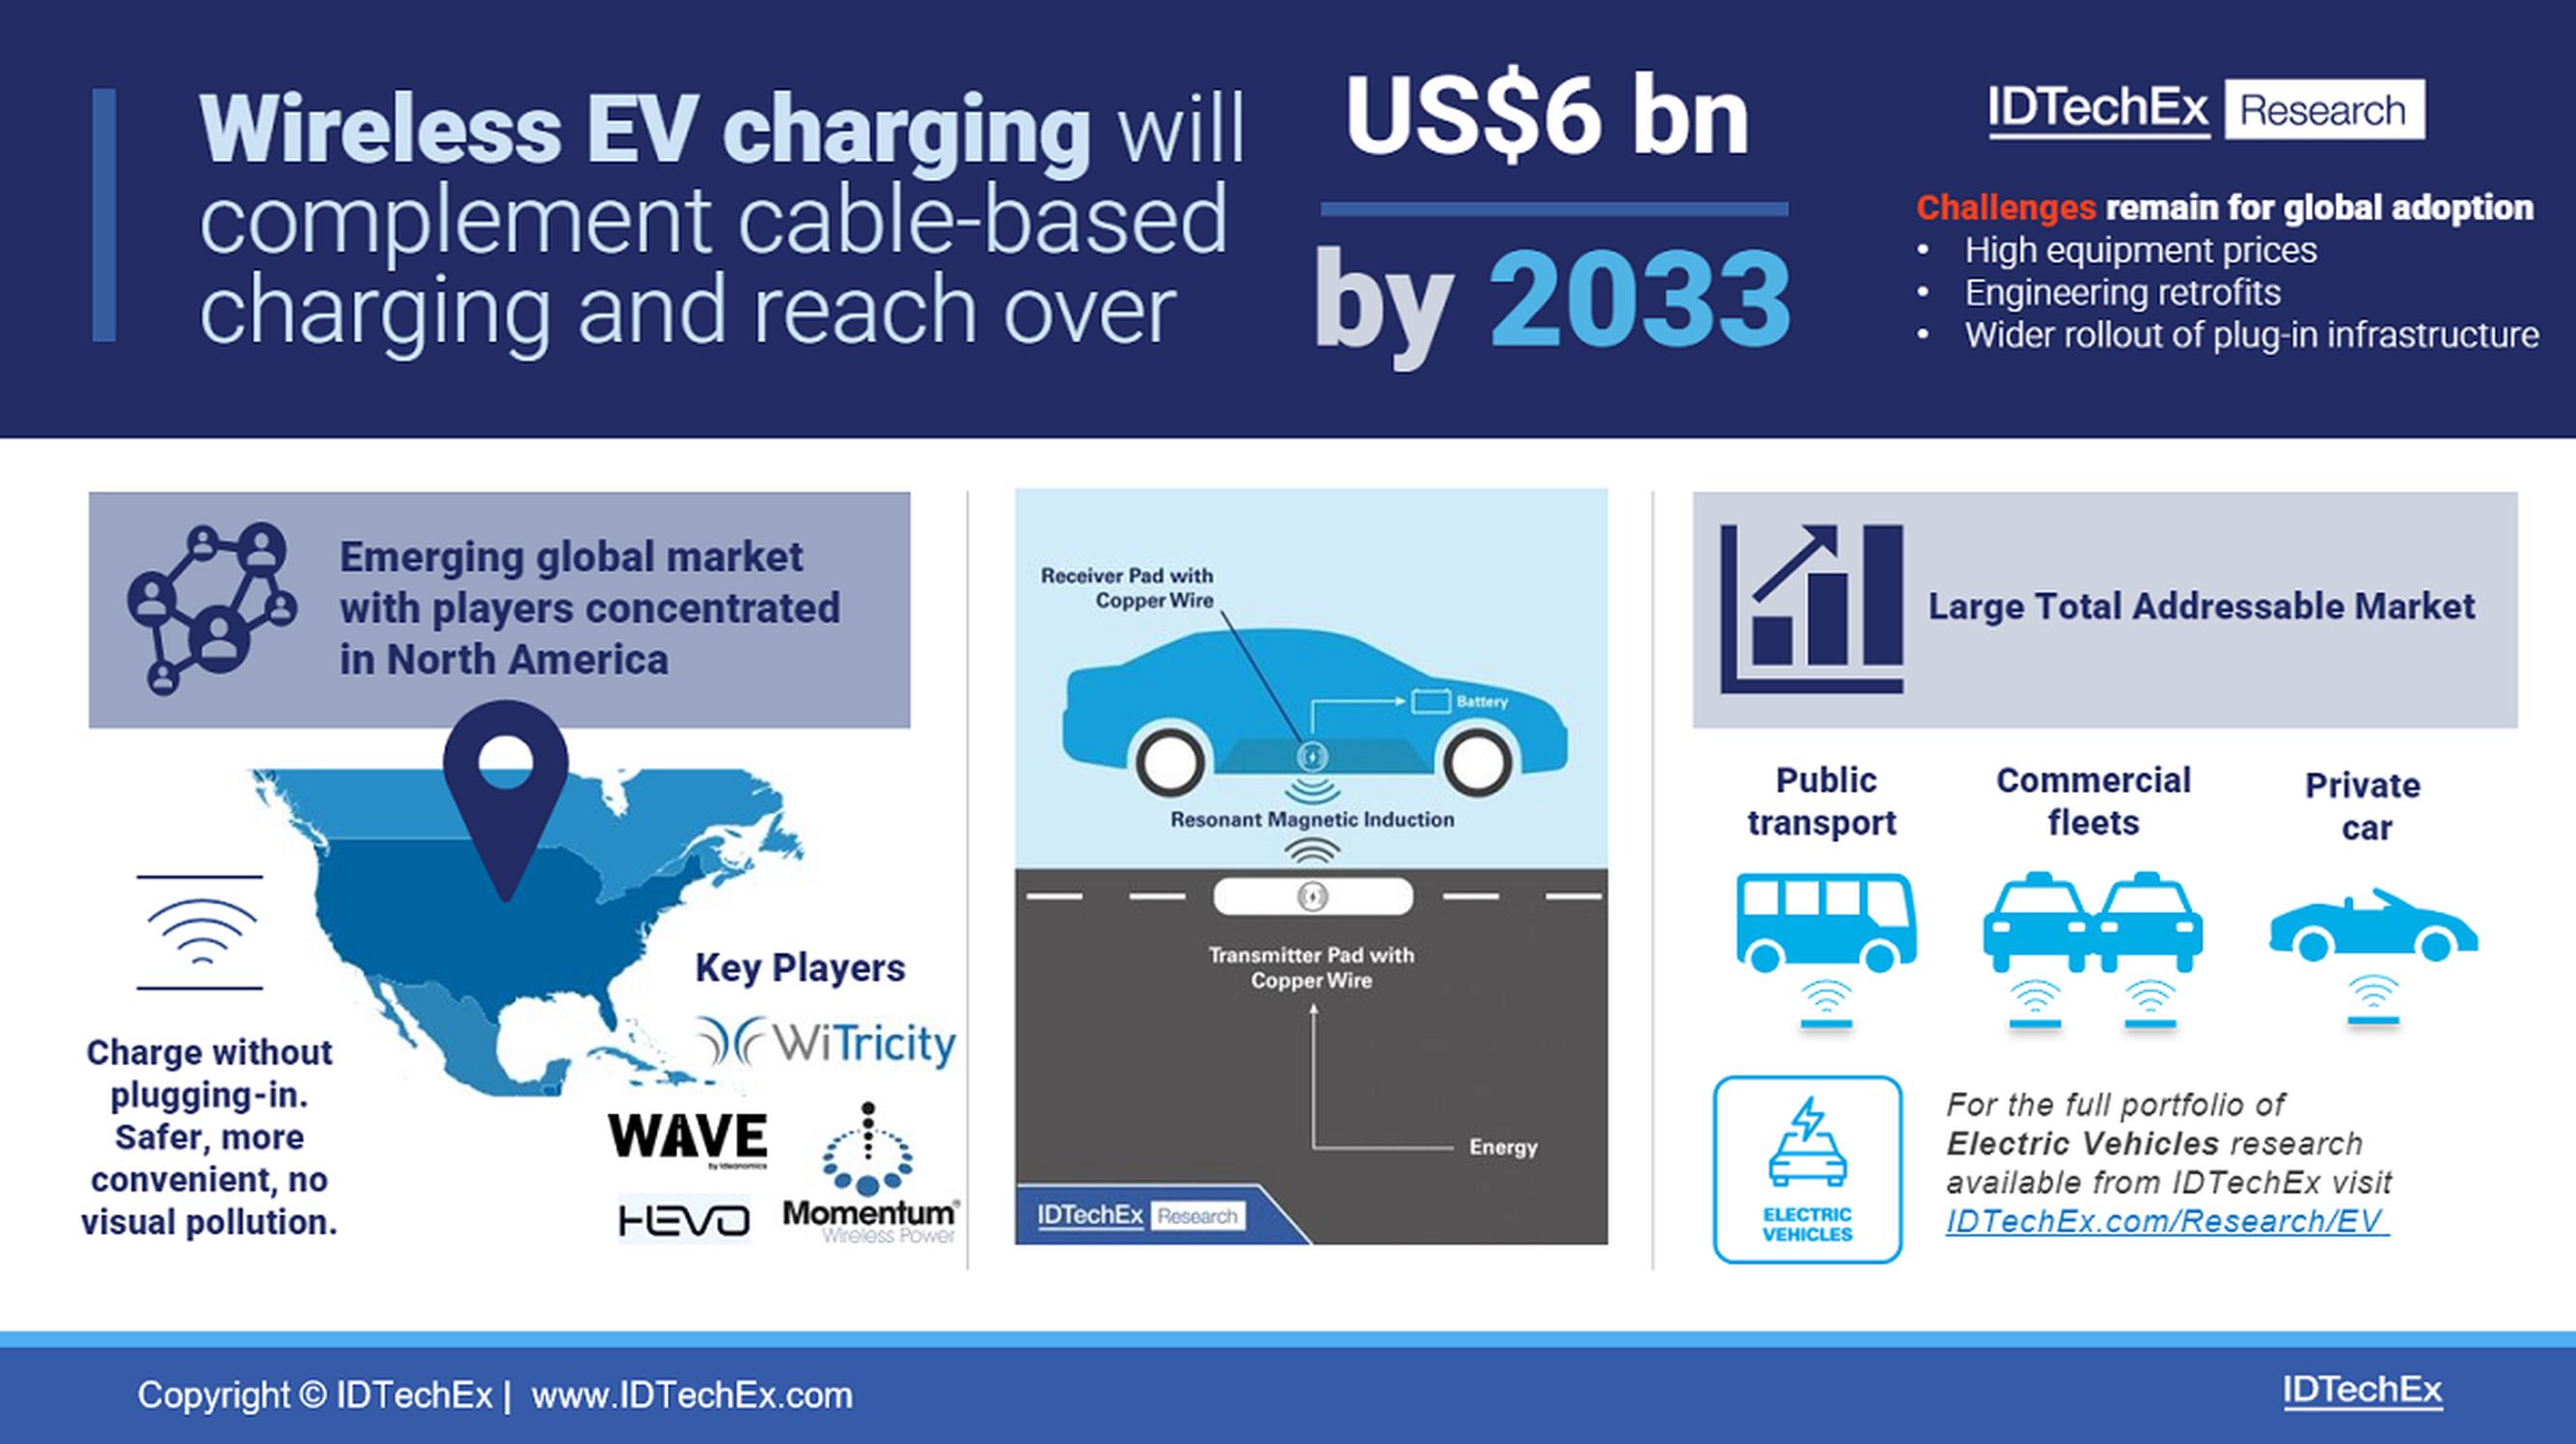 Charging electric vehicles without cables